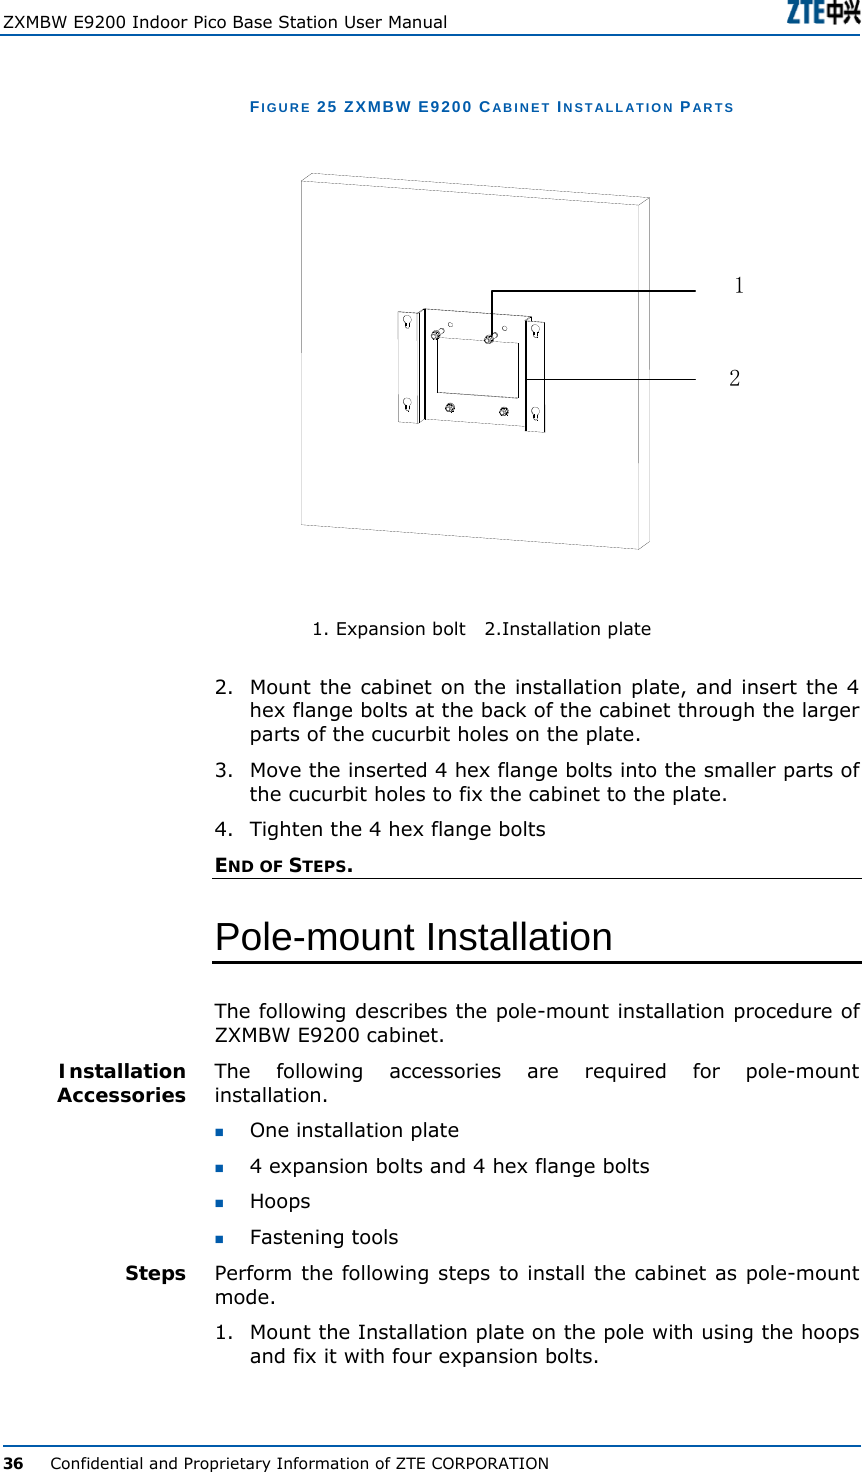  ZXMBW E9200 Indoor Pico Base Station User Manual   36      Confidential and Proprietary Information of ZTE CORPORATION FIGURE 25 ZXMBW E9200 CABINET INSTALLATION PARTS  12           1. Expansion bolt   2.Installation plate 2.  Mount the cabinet on the installation plate, and insert the 4 hex flange bolts at the back of the cabinet through the larger parts of the cucurbit holes on the plate. 3.  Move the inserted 4 hex flange bolts into the smaller parts of the cucurbit holes to fix the cabinet to the plate. 4.  Tighten the 4 hex flange bolts END OF STEPS. Pole-mount Installation The following describes the pole-mount installation procedure of ZXMBW E9200 cabinet. The following accessories are required for pole-mount installation.  One installation plate  4 expansion bolts and 4 hex flange bolts   Hoops          Fastening tools Perform the following steps to install the cabinet as pole-mount mode. 1.  Mount the Installation plate on the pole with using the hoops and fix it with four expansion bolts. Installation Accessories Steps 